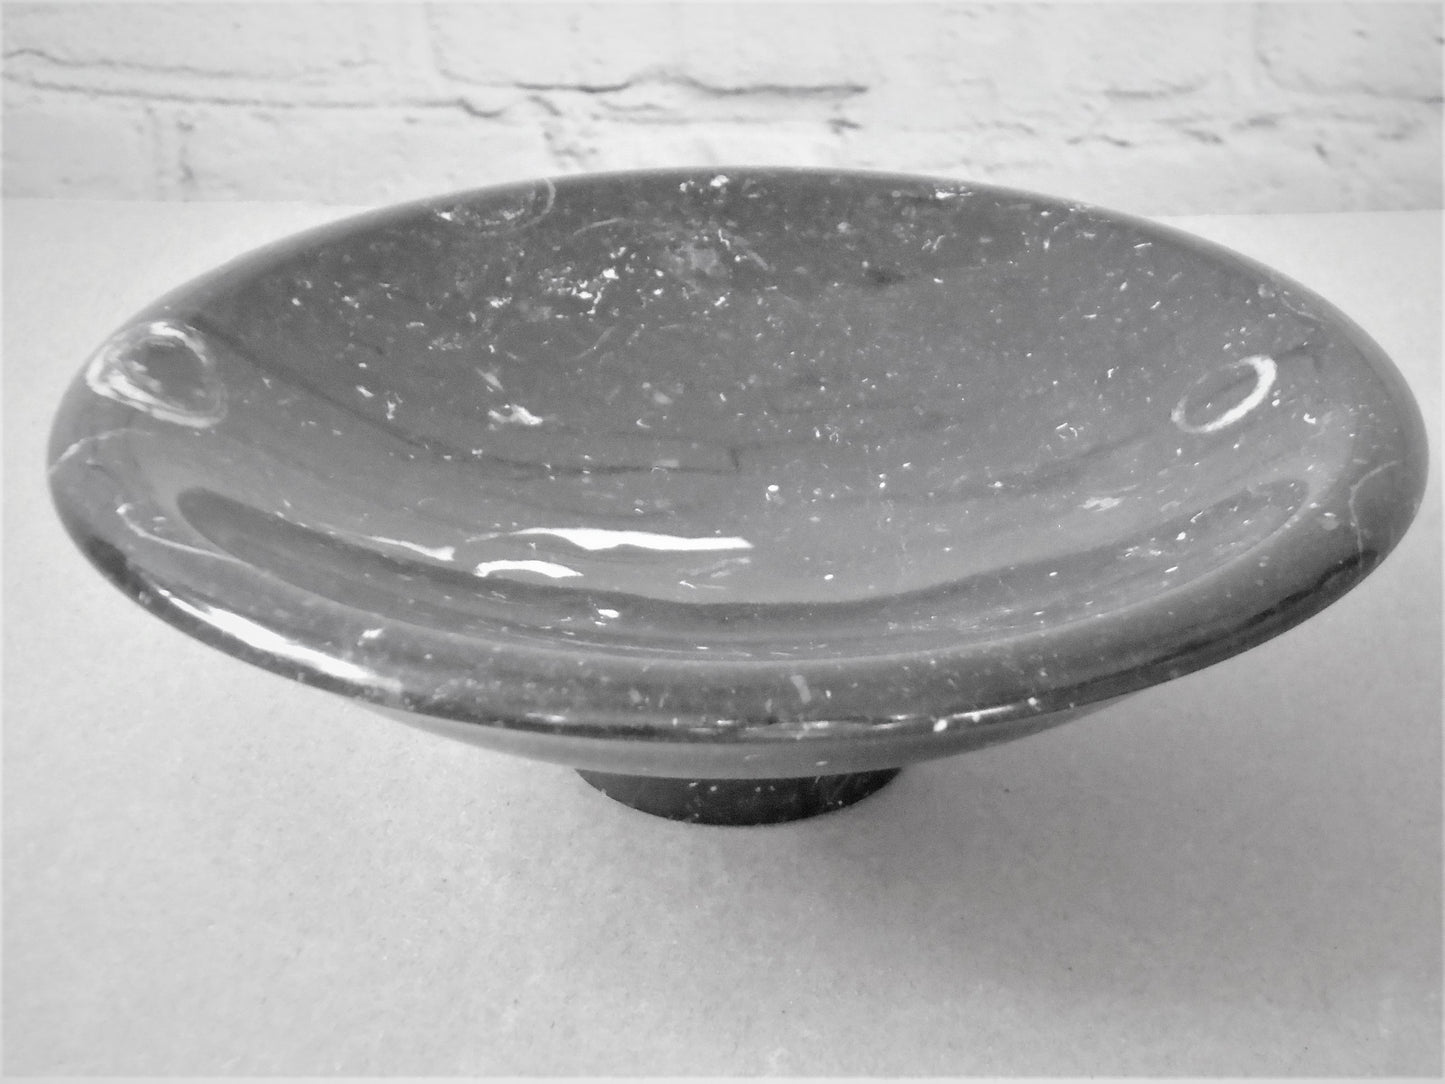 A Small Kilkenny Fossil Marble Bowl/Dish